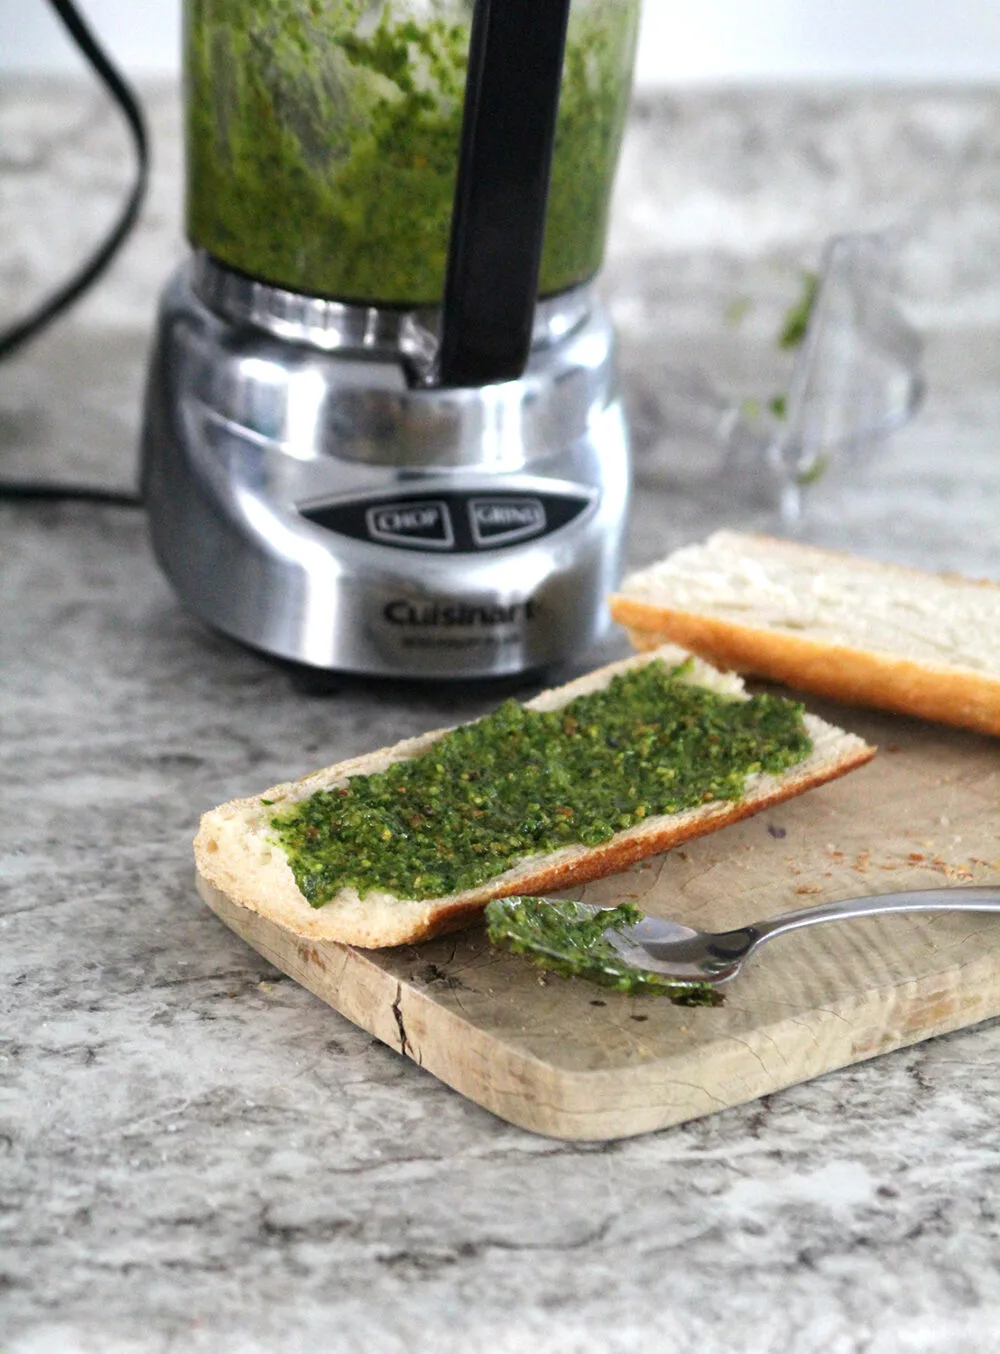 Green pesto with brown specks is spread on bread that sits on a wooden cutting board. A spoon with pesto on it sits nearby. A mini food processor sits in the background.